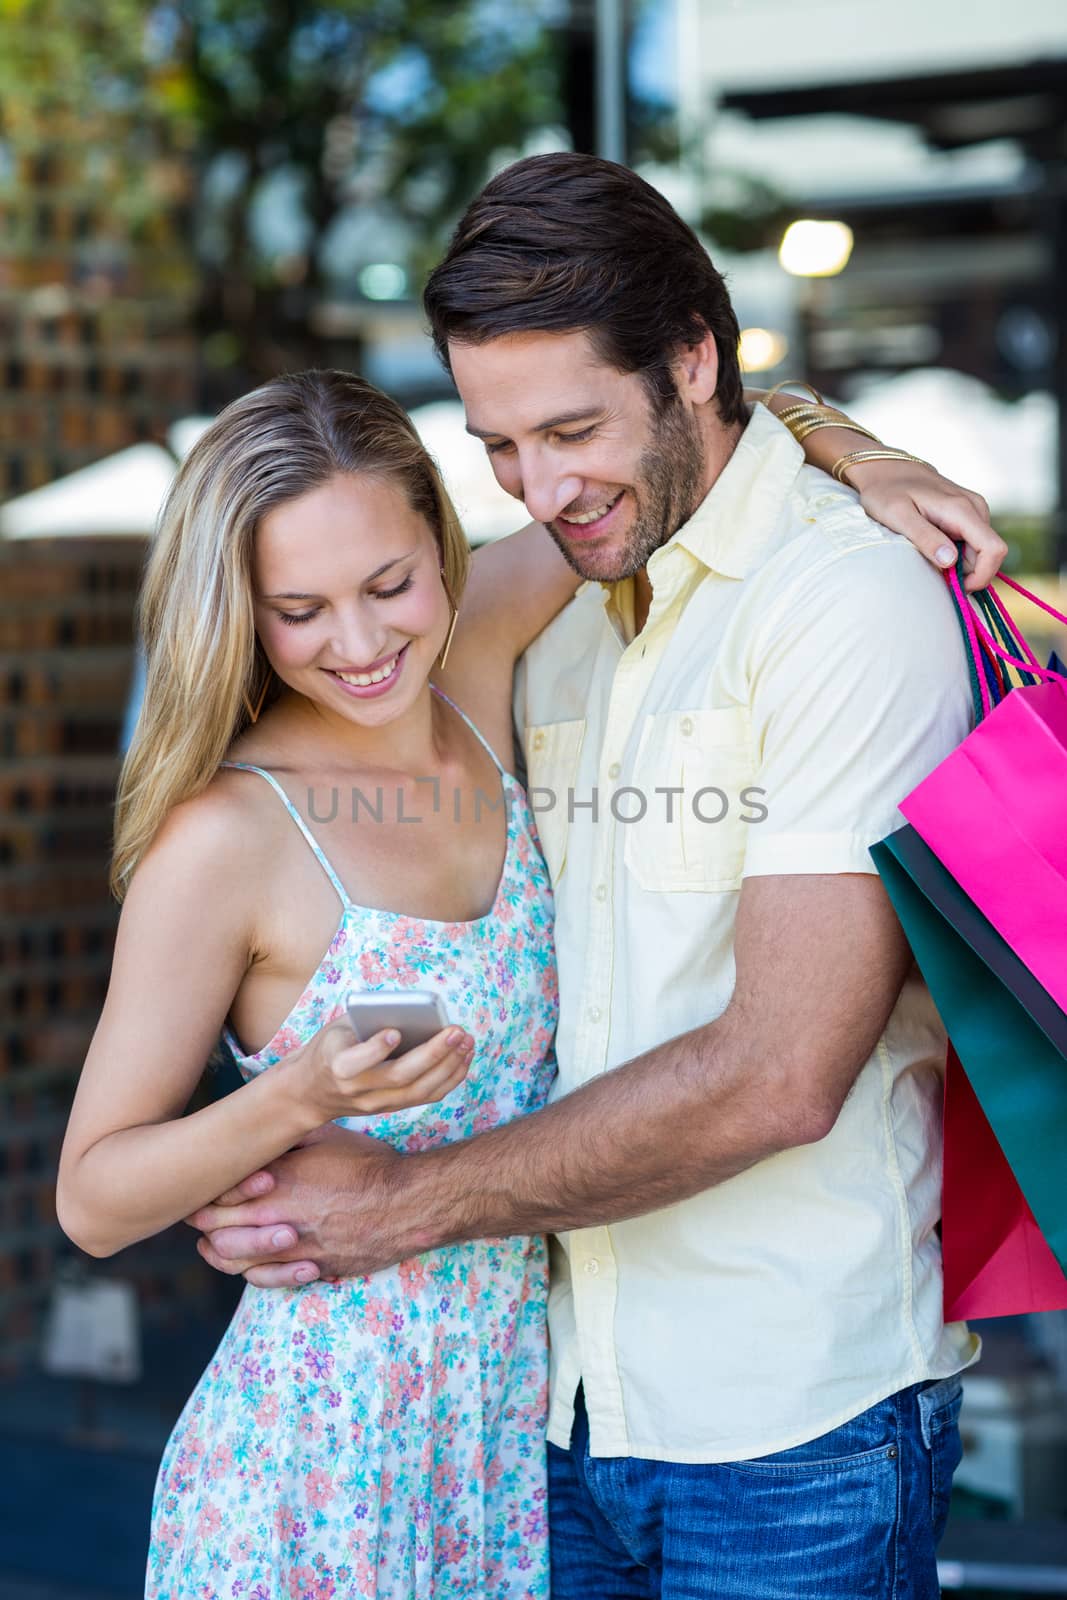 Smiling couple embracing and looking at smartphone at shopping mall